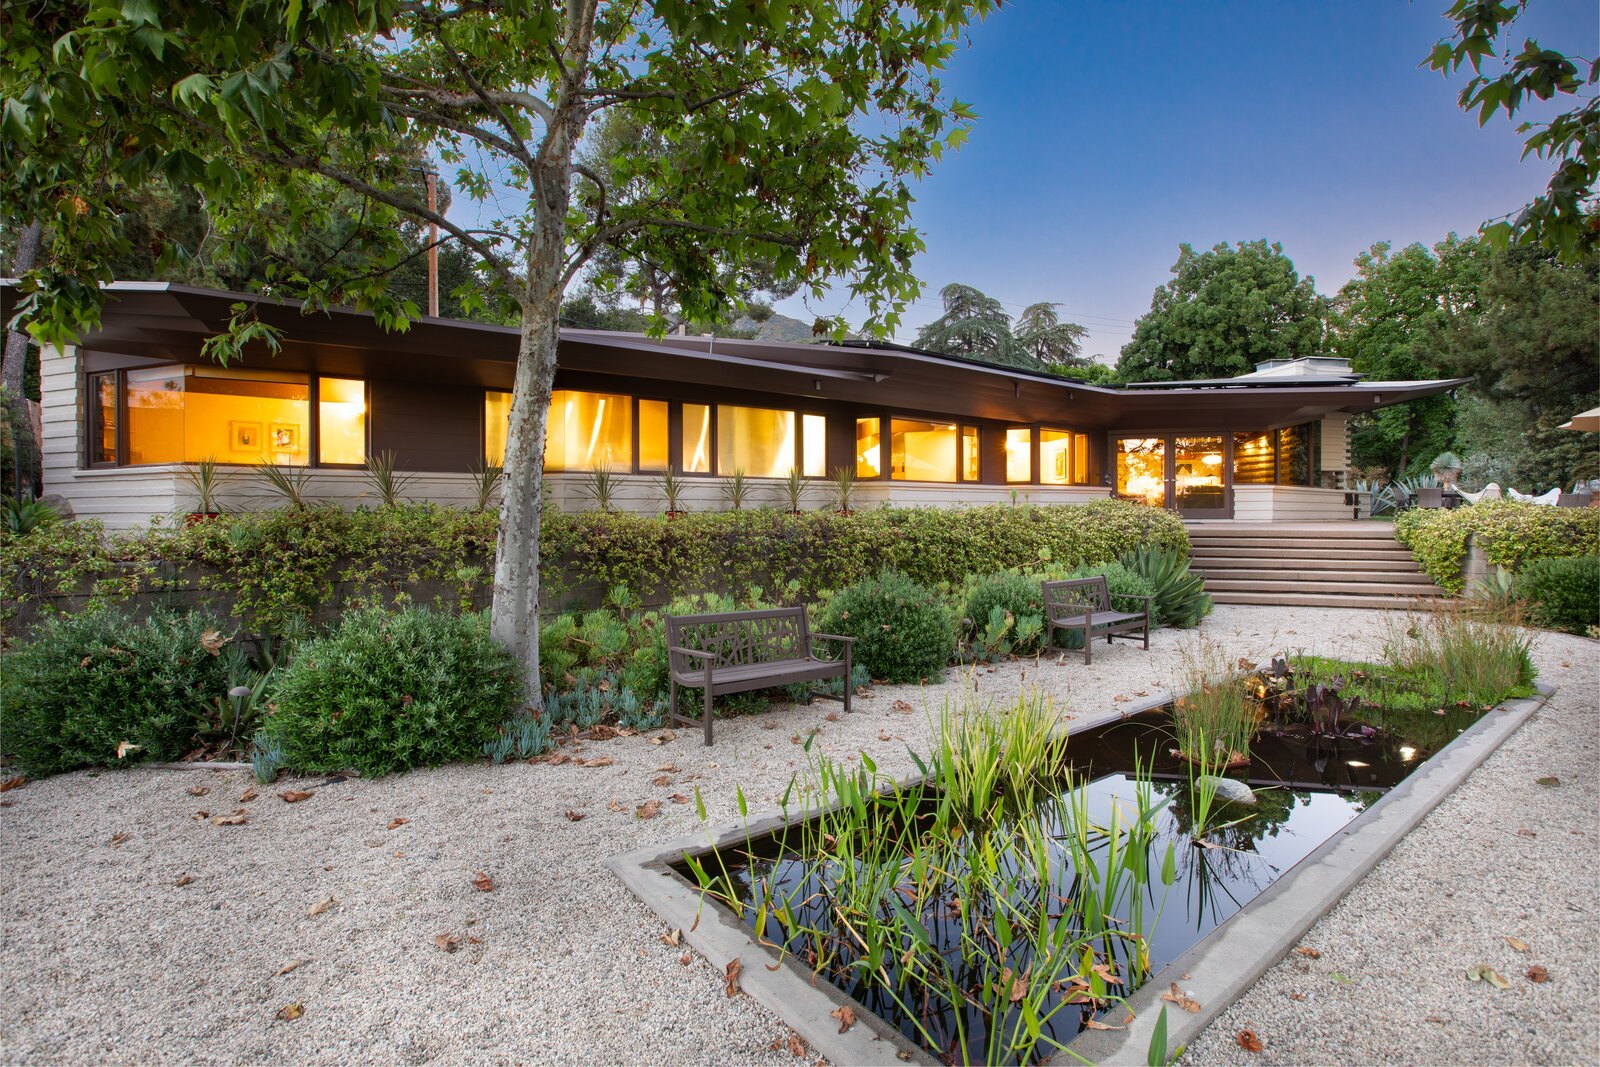 Listed at $3M, This Usonian-Style Lloyd Wright Home Is a Rare Find